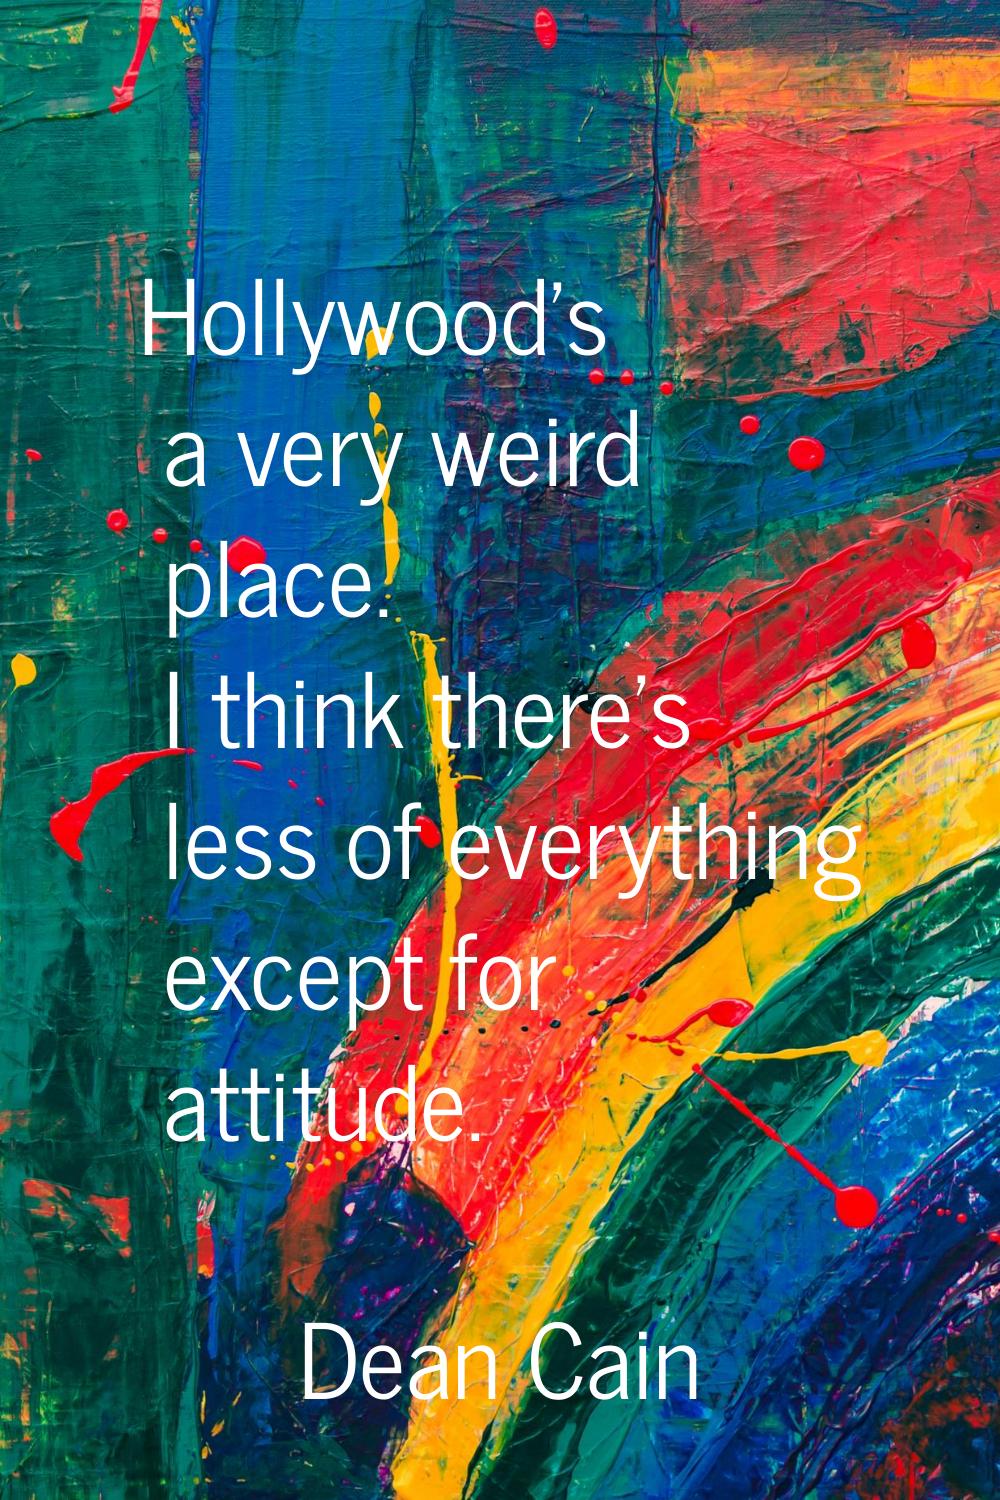 Hollywood's a very weird place. I think there's less of everything except for attitude.